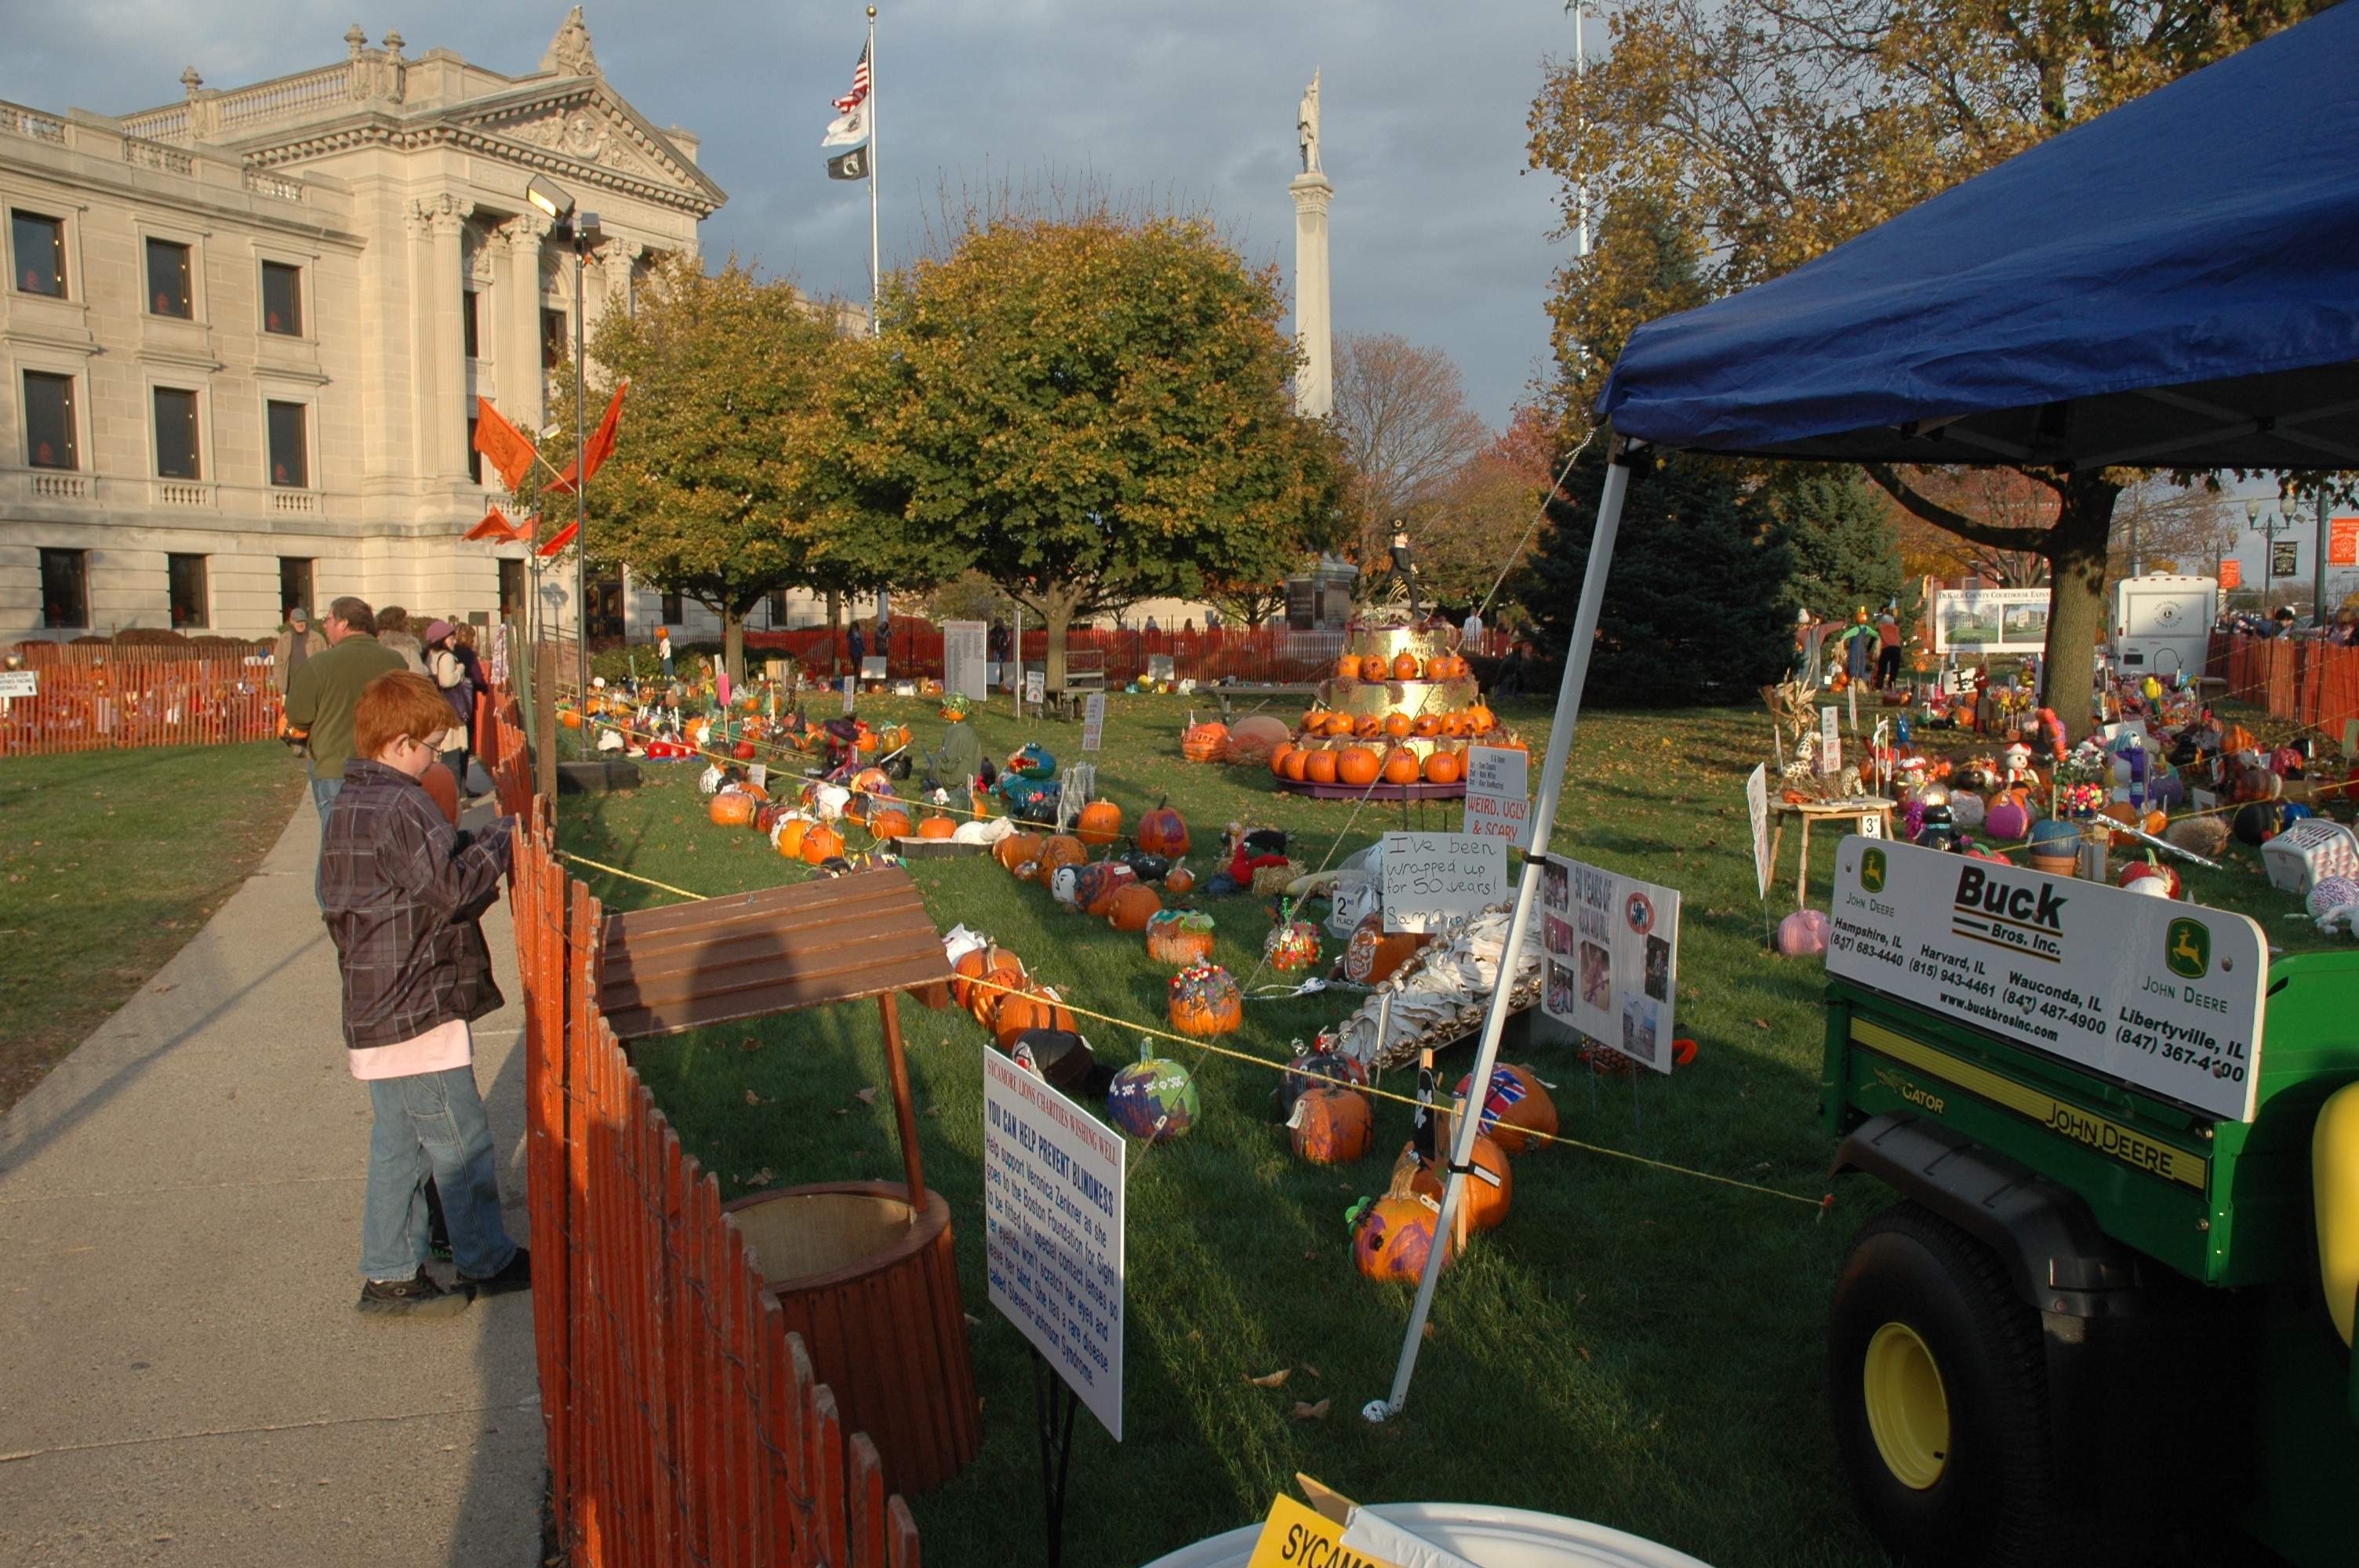 Rows of pumpkins and stalls at the Sycamore Pumpkin Festival